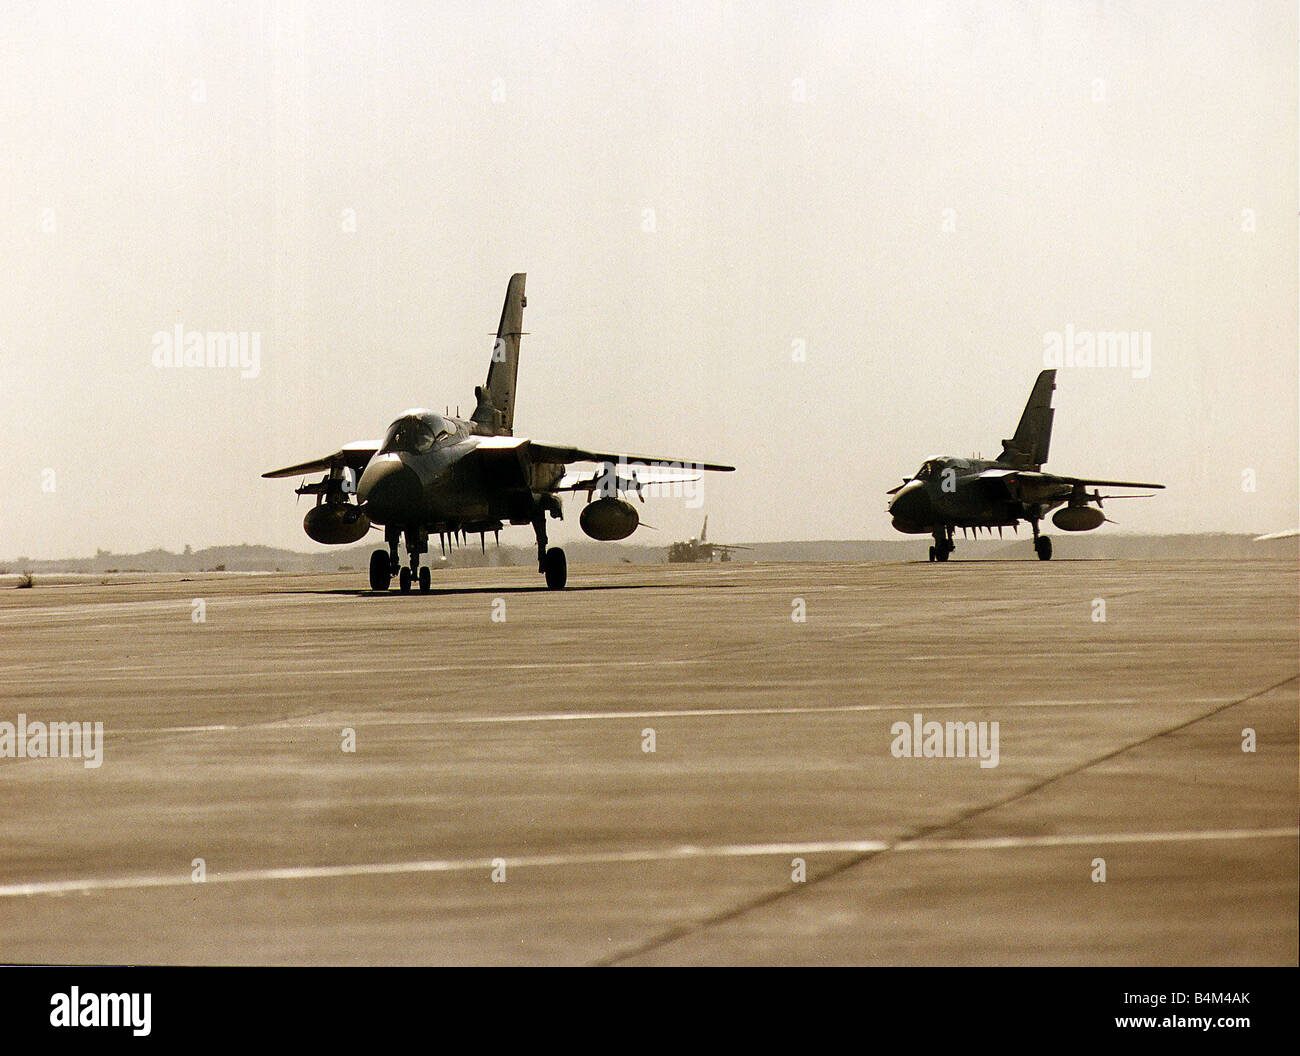 Two RAF Panavia Tornado F3 fighter planes used in the Gulf War taxi along runway Stock Photo